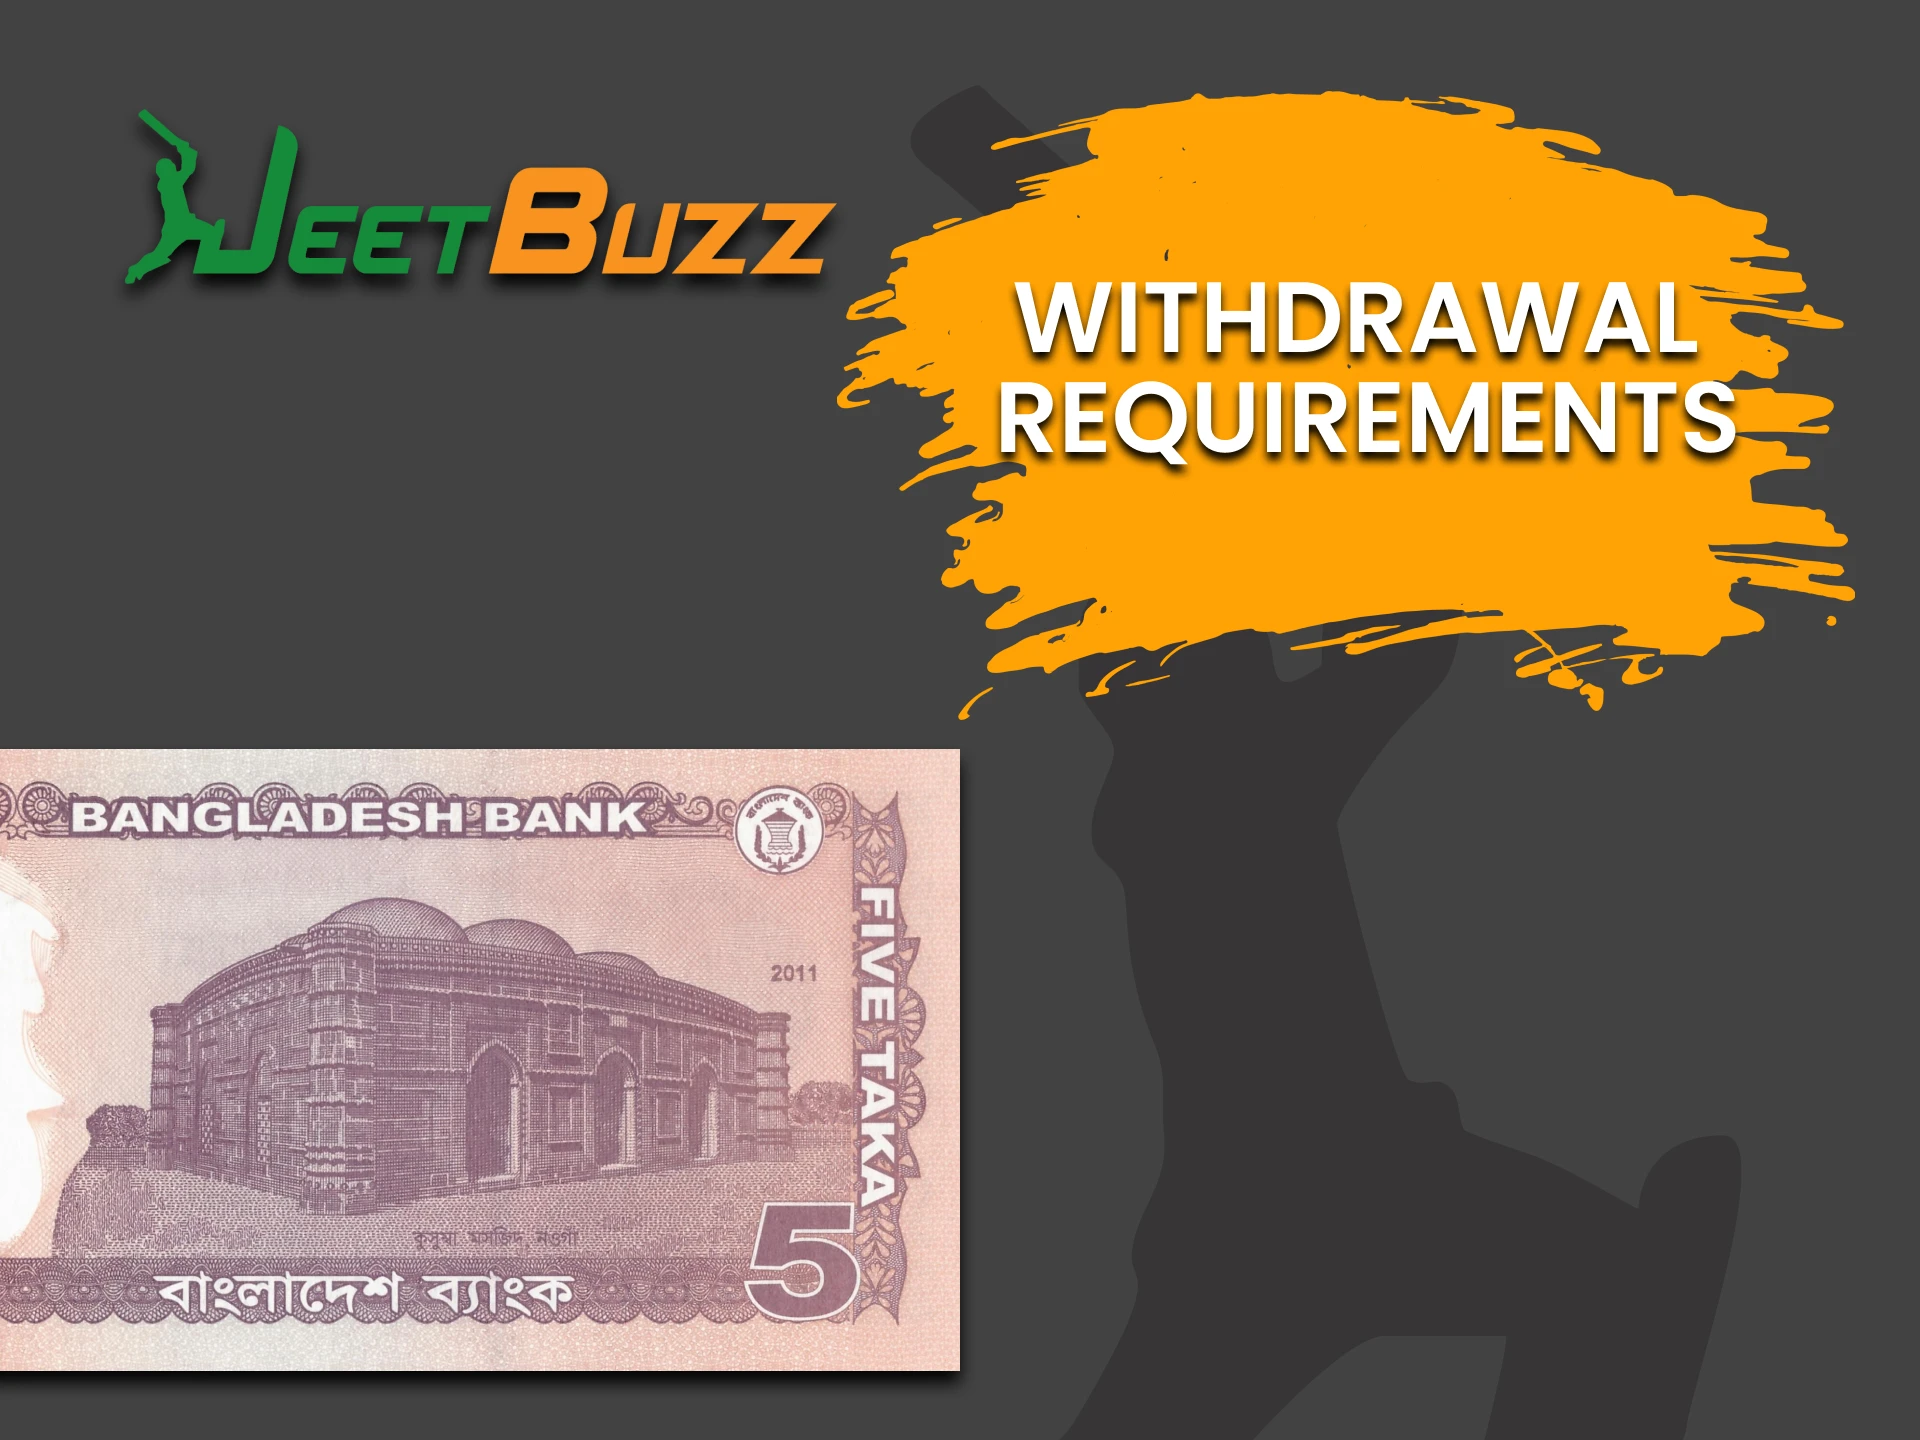 Find out the JeetBuzz withdrawal requirements.